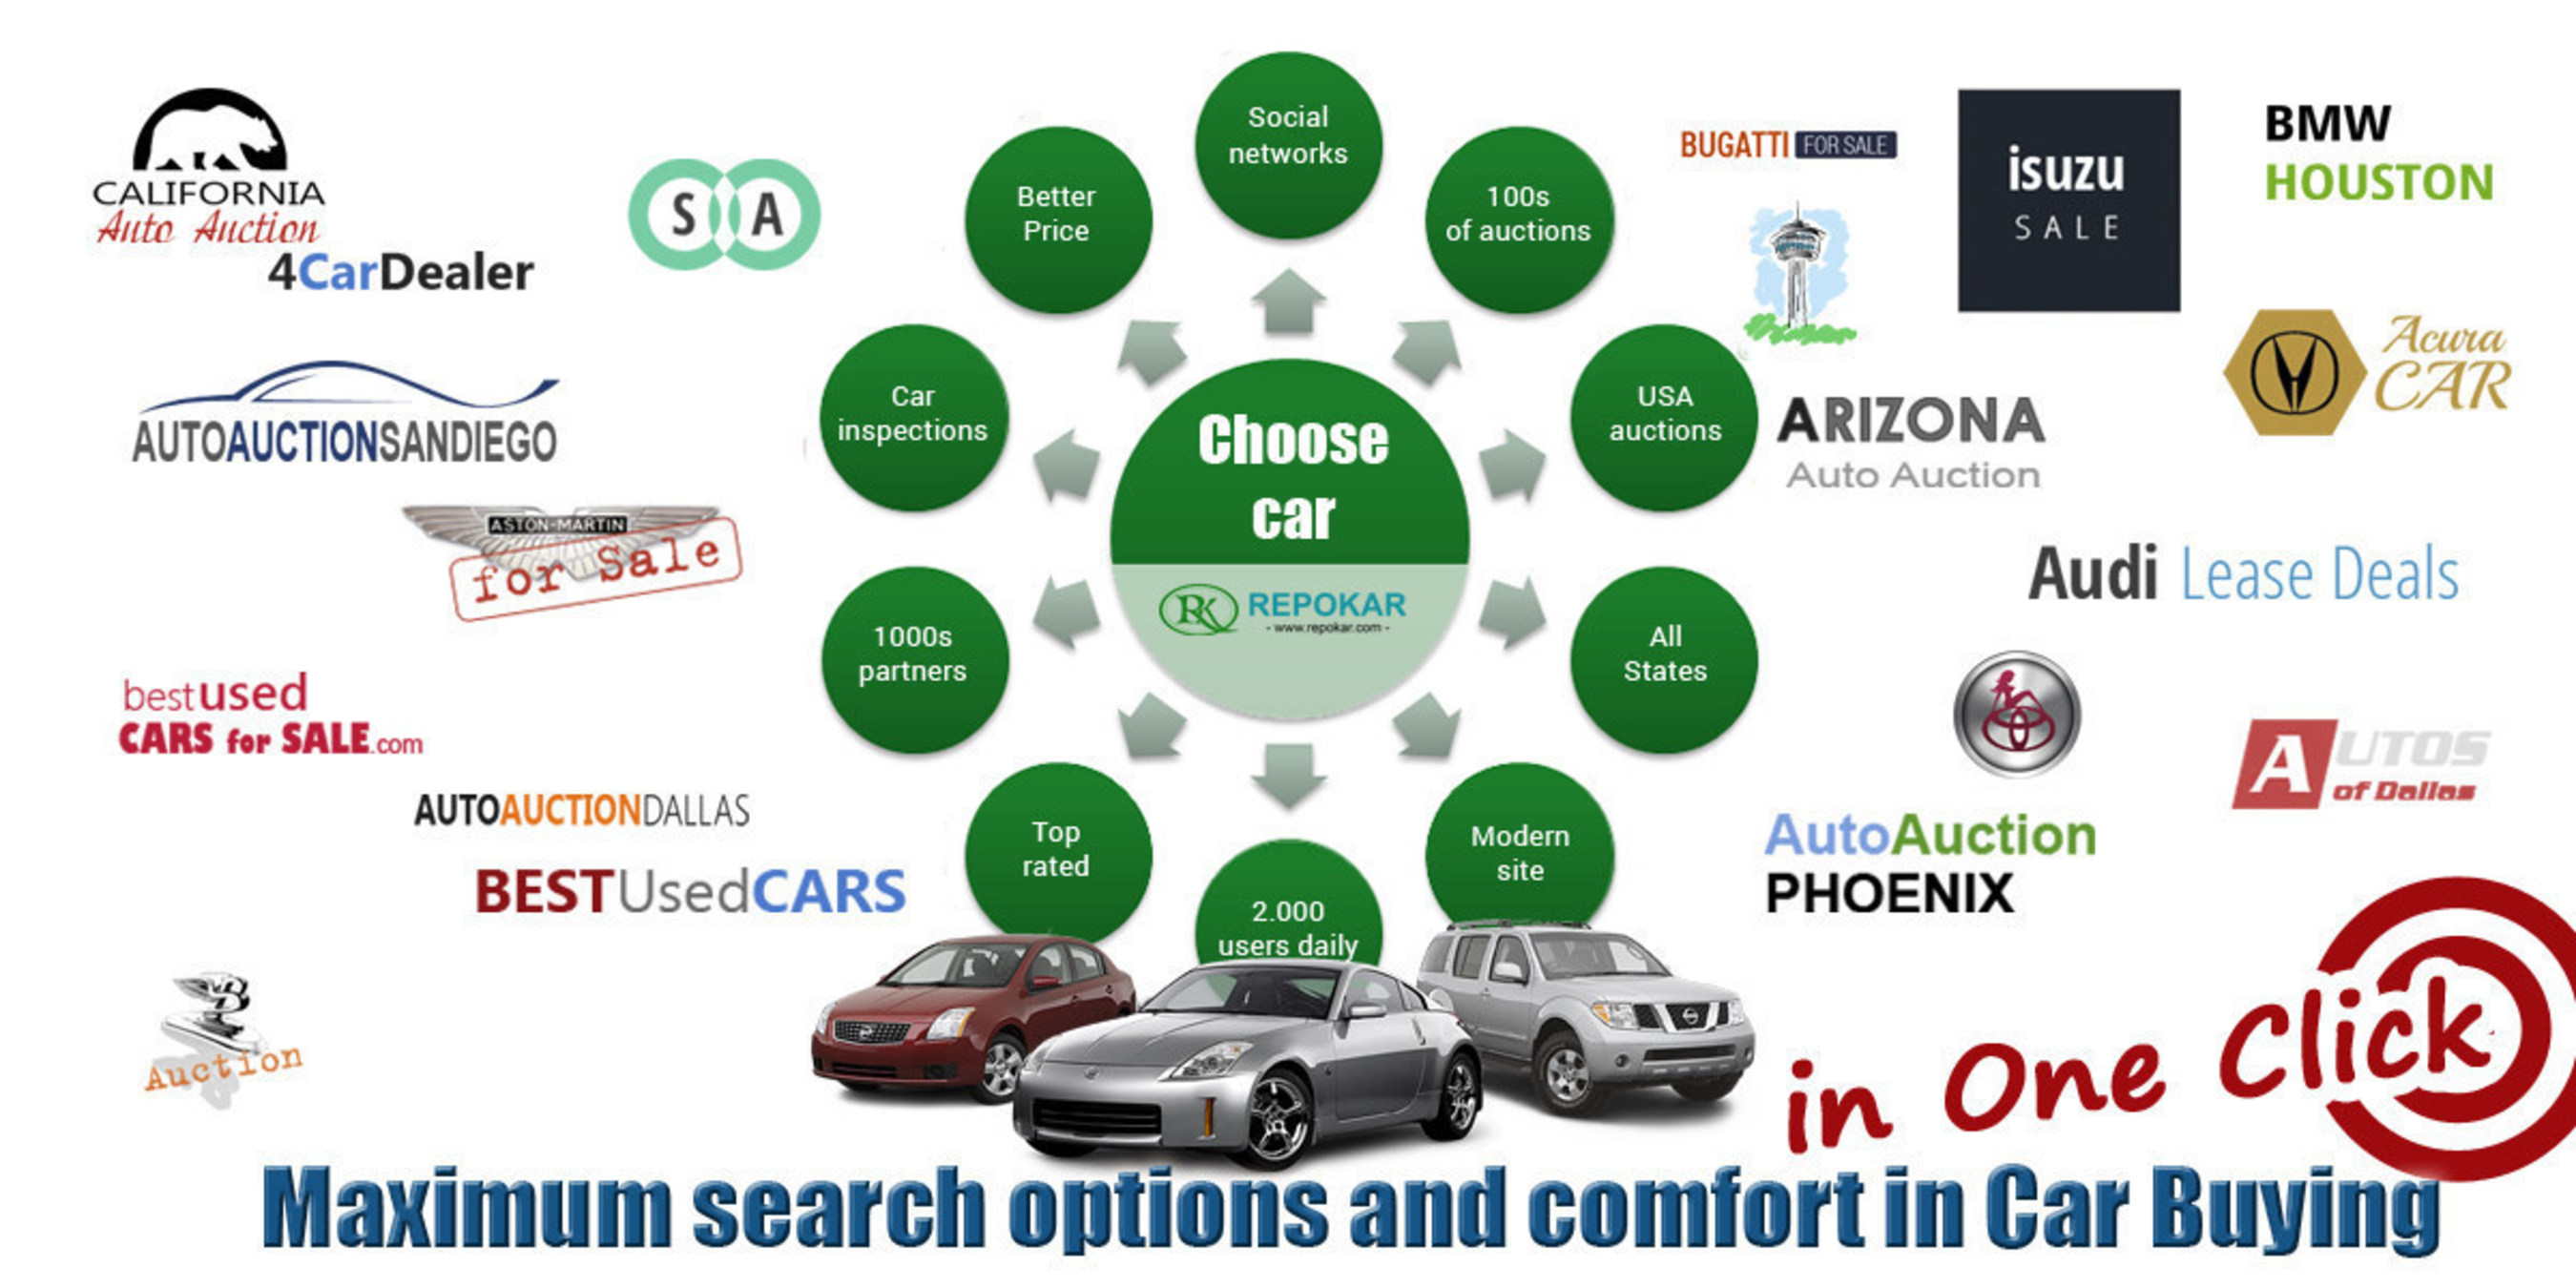 Repokar, Auto Auction, Sales, Automotive, Car, Buyer, Seller, Auction, Old, New, Previously Owned, Finance, Purchase